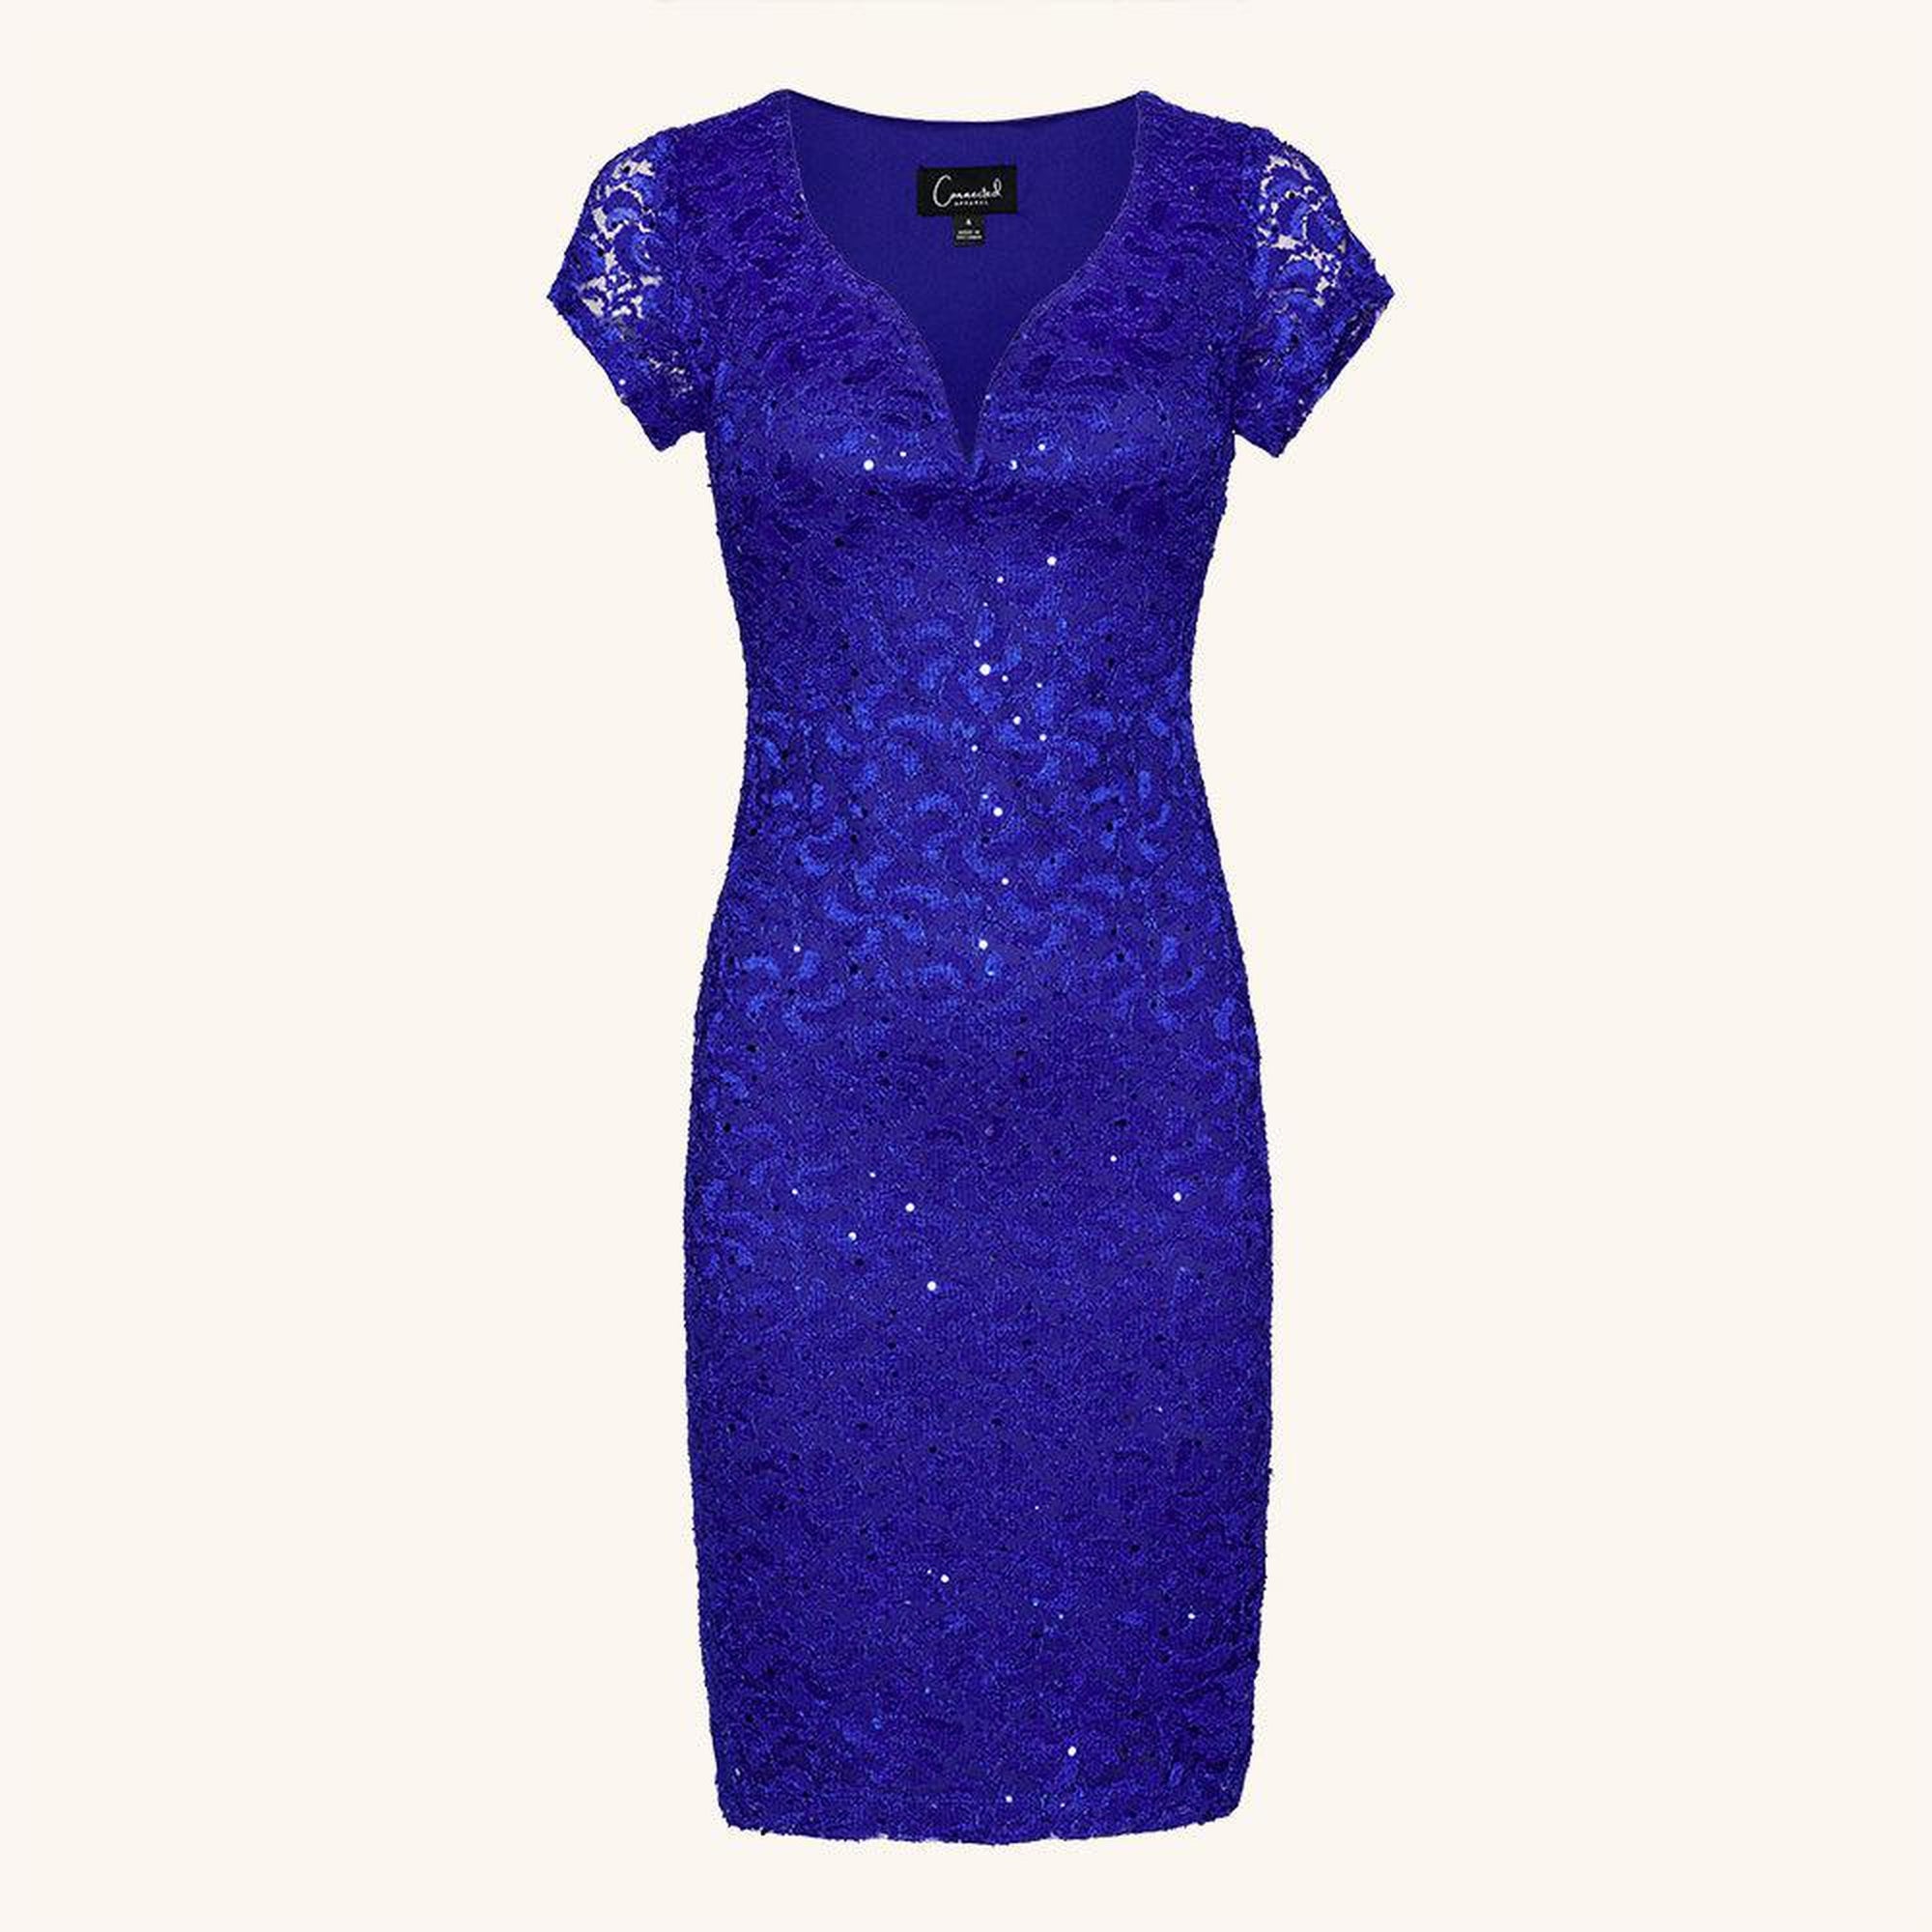 Woman posing wearing Cobalt Gracie Cobalt Sequin Lace Cocktail Dress from Connected Apparel